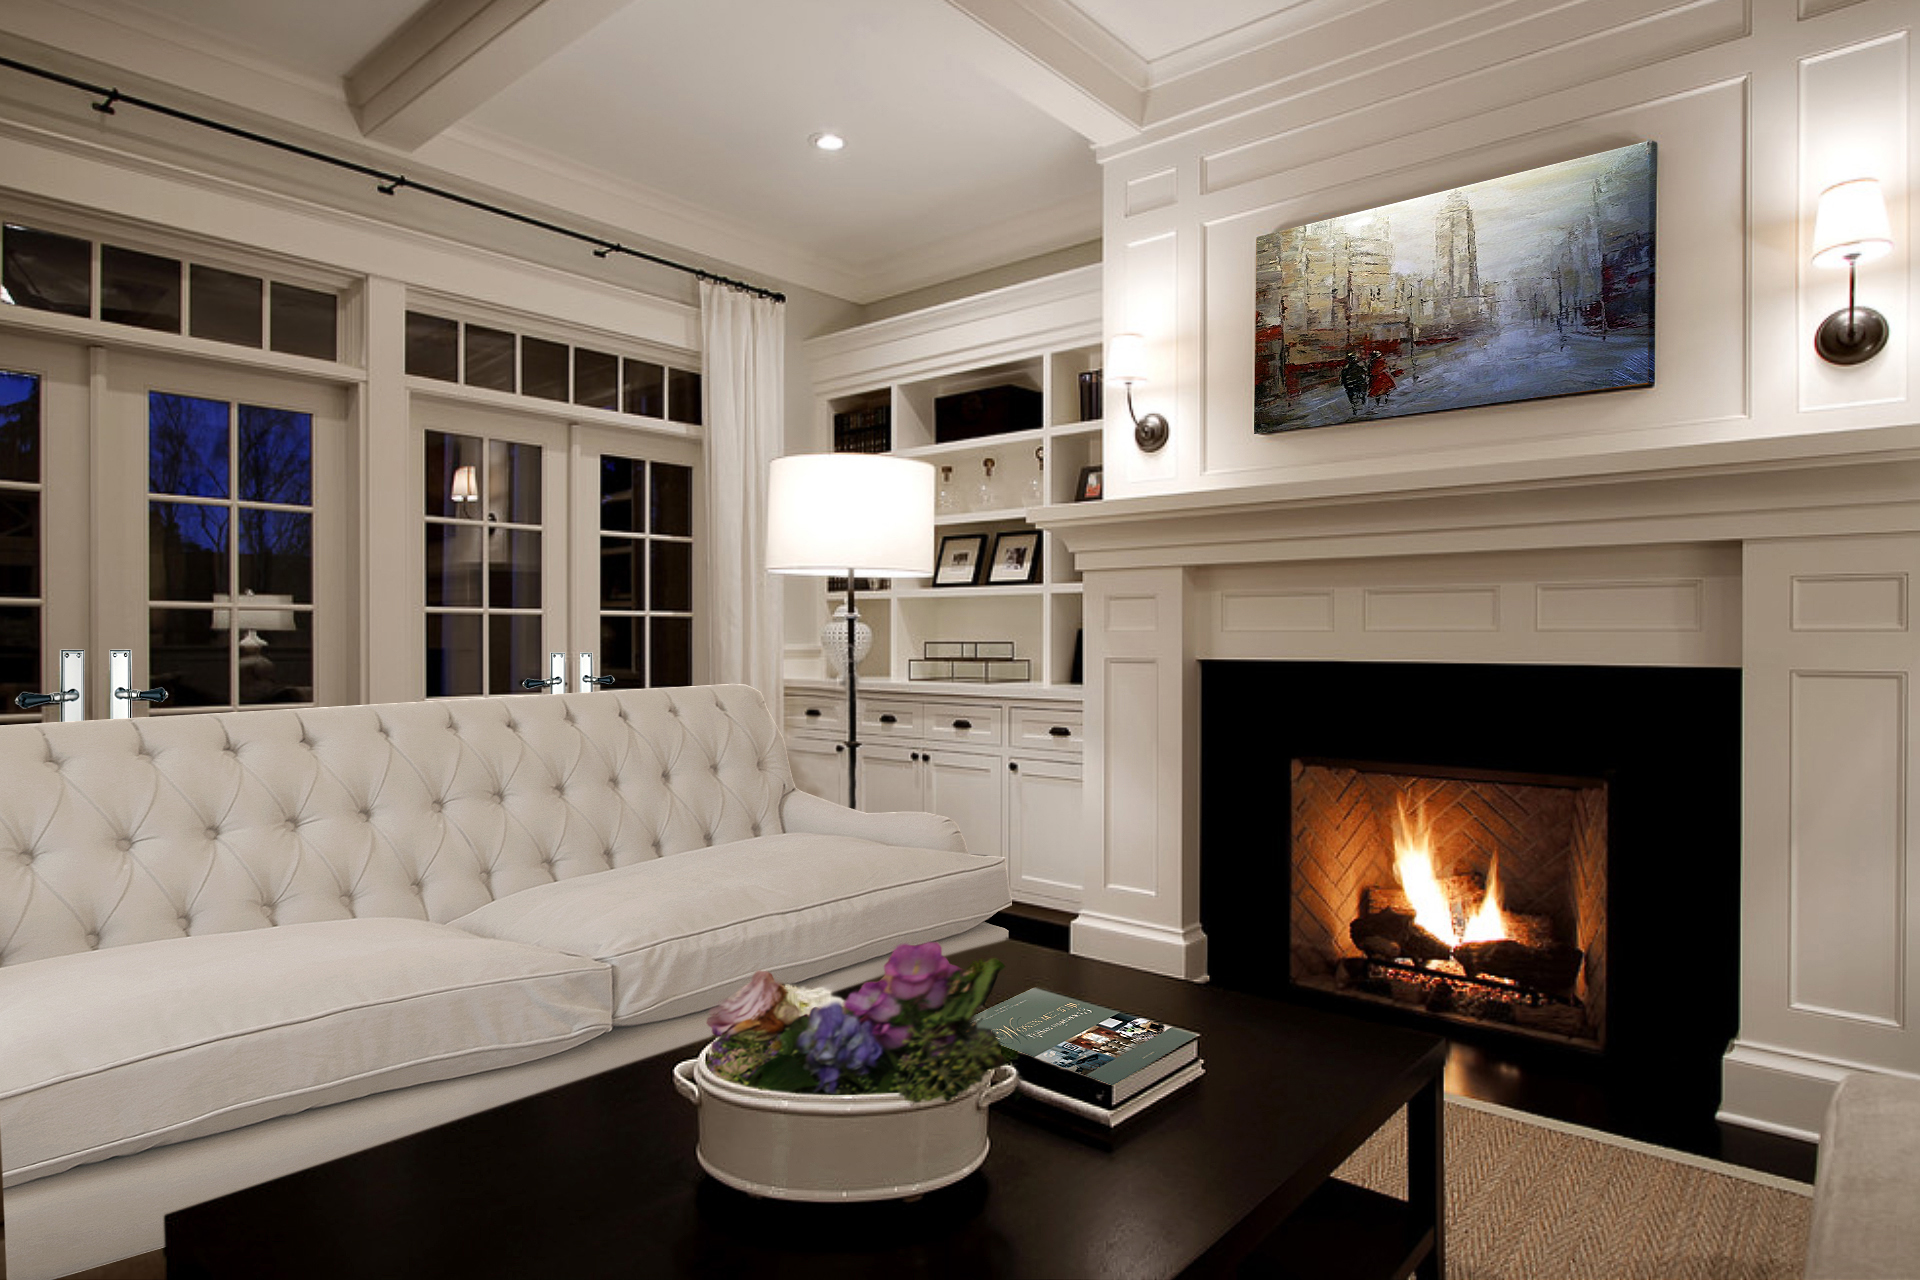 Contemporary Interior - Marcotte Style